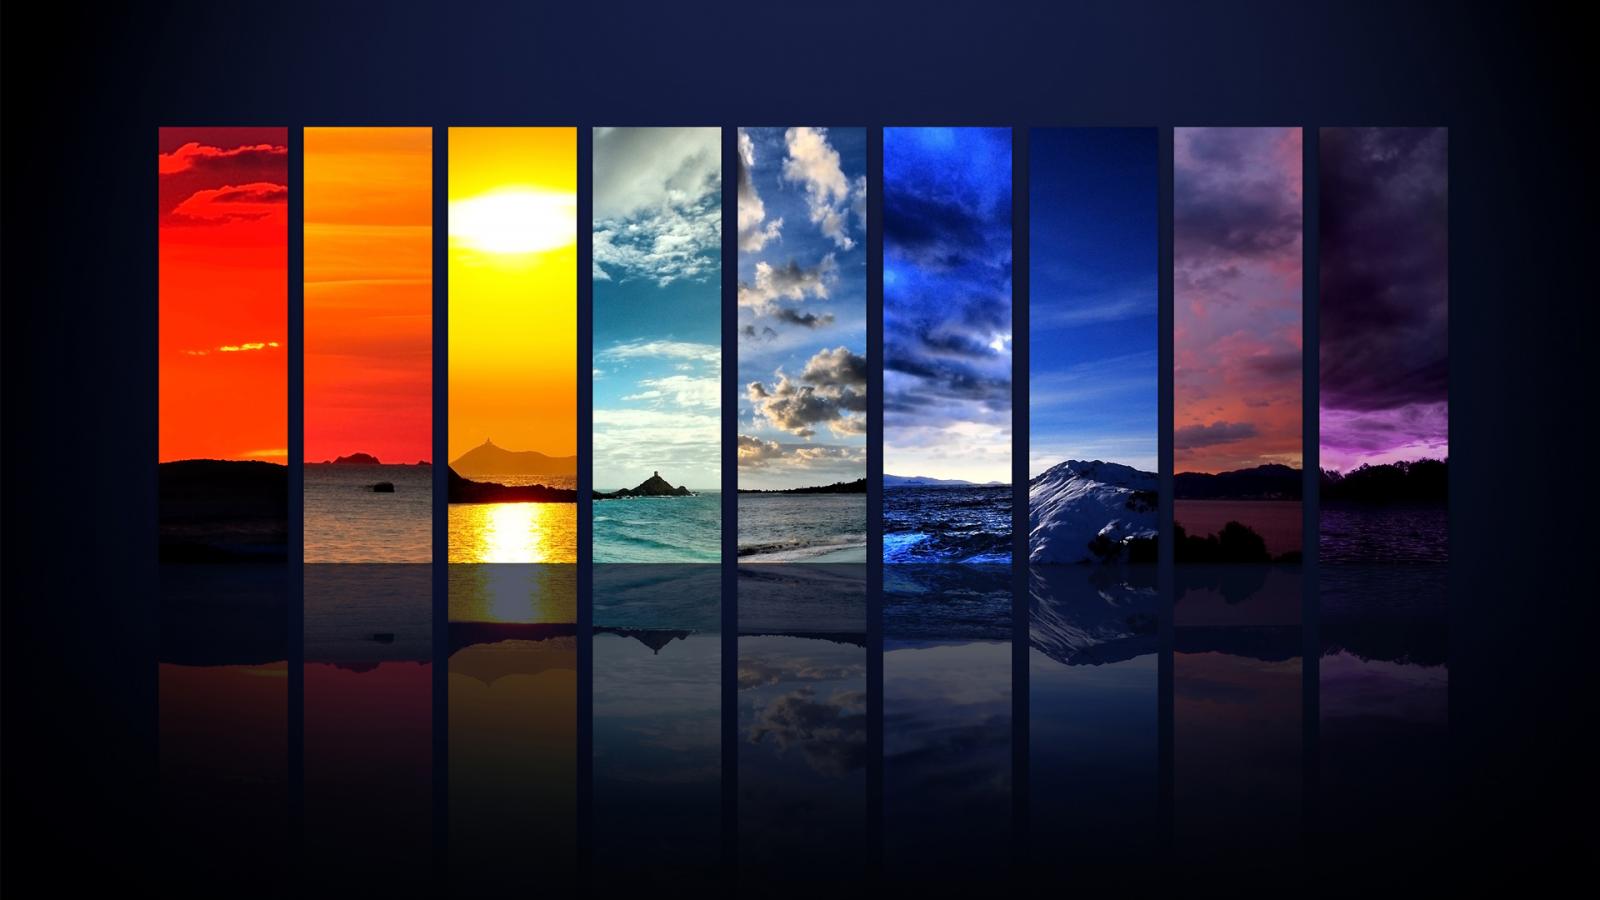 Awesome Rainbow Wallpaper